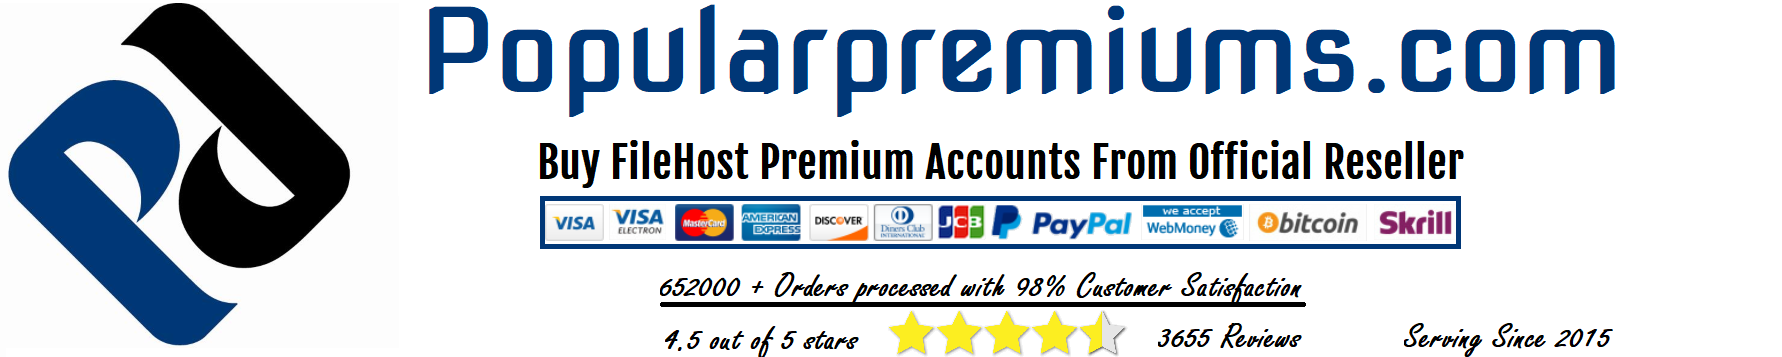 Buy Premium Accounts from Official Reseller Using PayPal